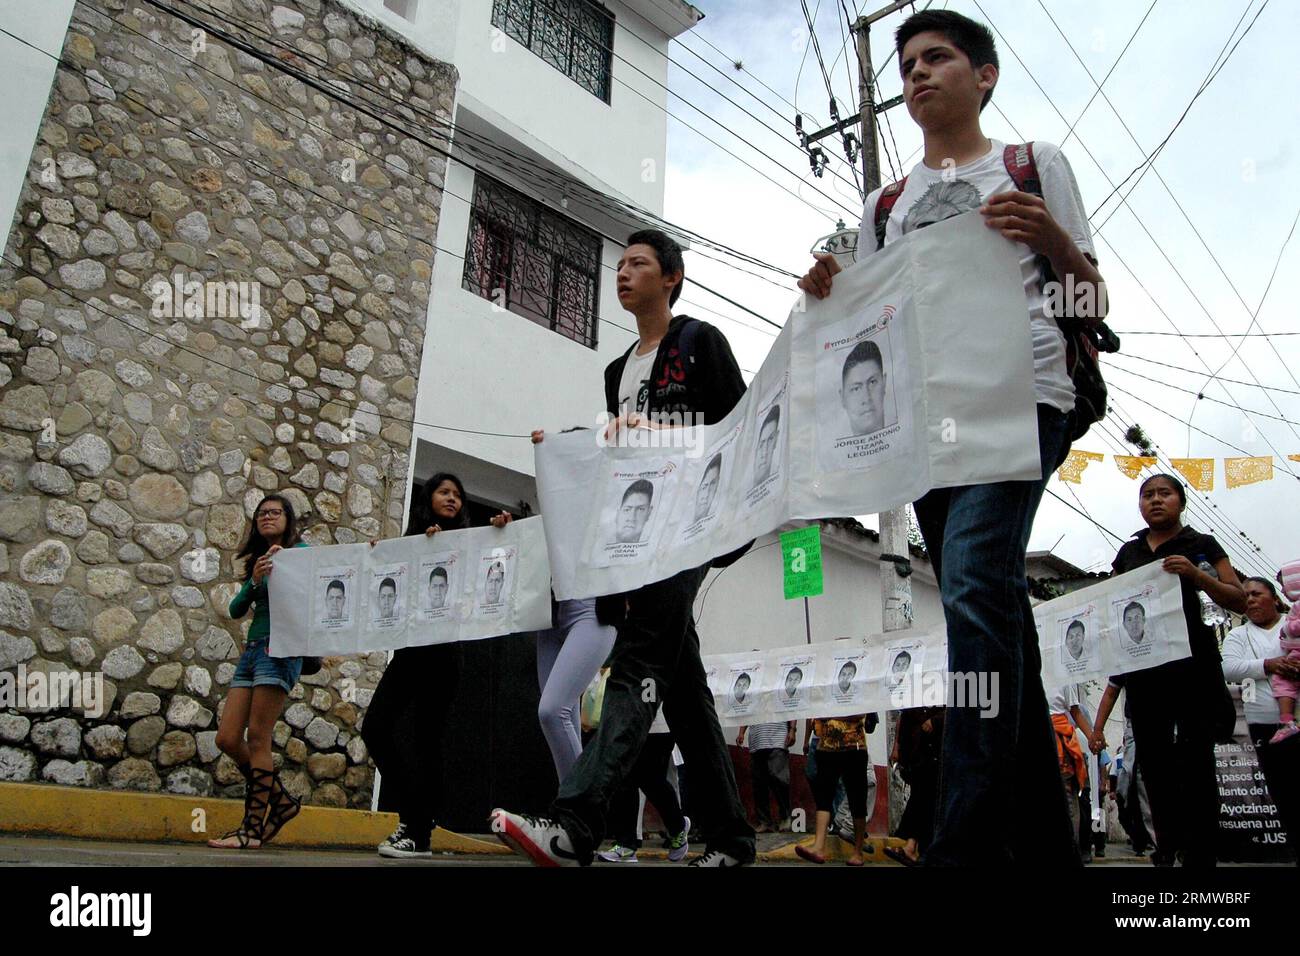 Youngsters take part in a march in Tuxtla, Guerrero, Mexico, on Oct. 19, 2014. According to local press, the march took place to protest the disappearance of the 43 students of the normal Rural School Raul Isidro Burgos of Ayotzinapa, that went missing on Sept. 26 in Iguala municipality. Around 1,200 agents of the Federal police are looking for the 43 missing students in a community in the southern state of Guerrero. )(wxl) MEXICO-GUERRERO-SOCIETY-MARCH EdgarxdexJesusxEspinoza PUBLICATIONxNOTxINxCHN   Youngsters Take Part in a March in Tuxtla Guerrero Mexico ON OCT 19 2014 According to Local P Stock Photo